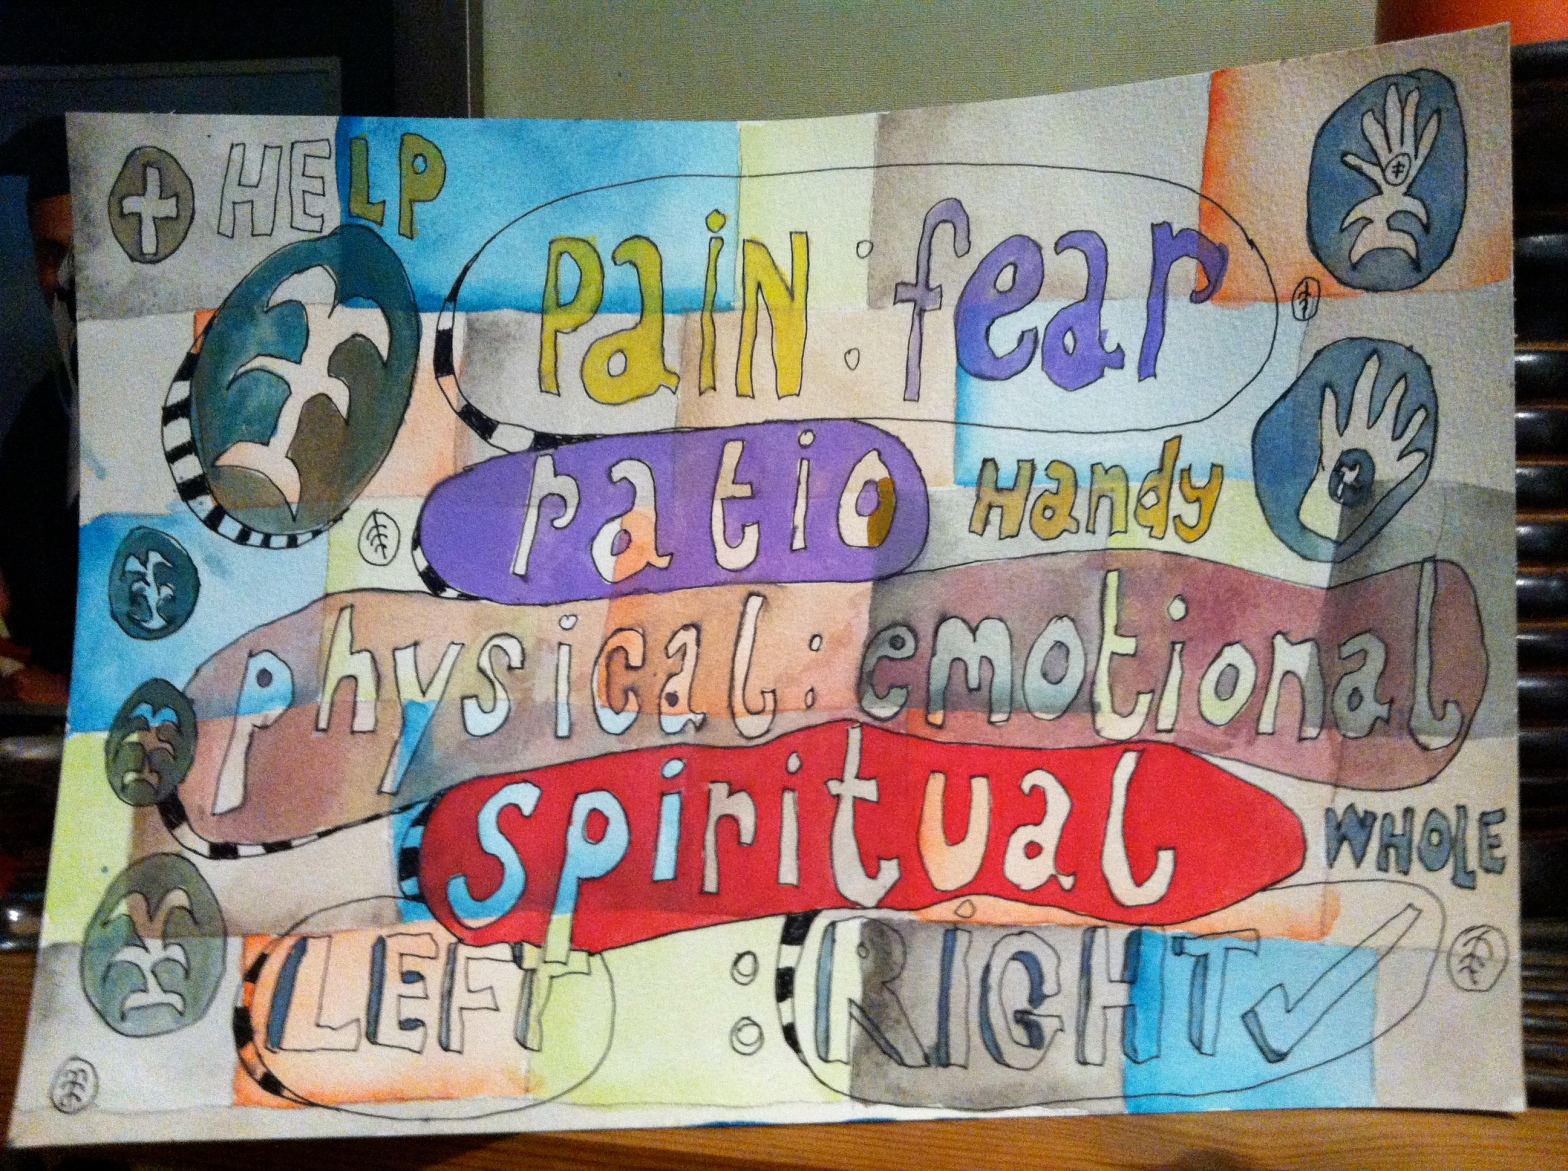 Watercolour study with text, colour and symbols depicting Fear and pain.